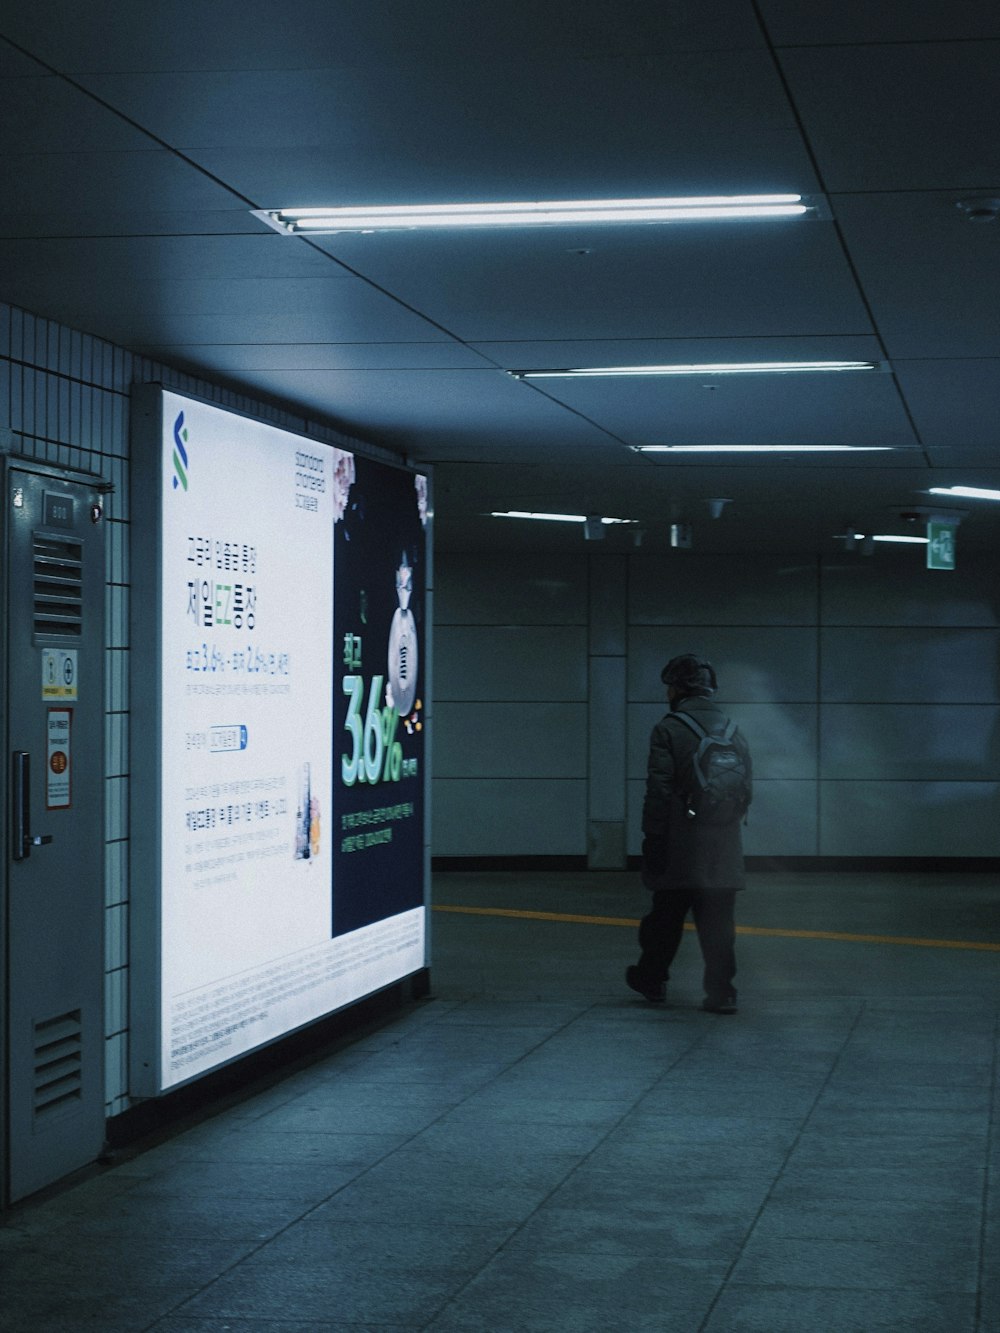 a person standing next to a large screen in a building